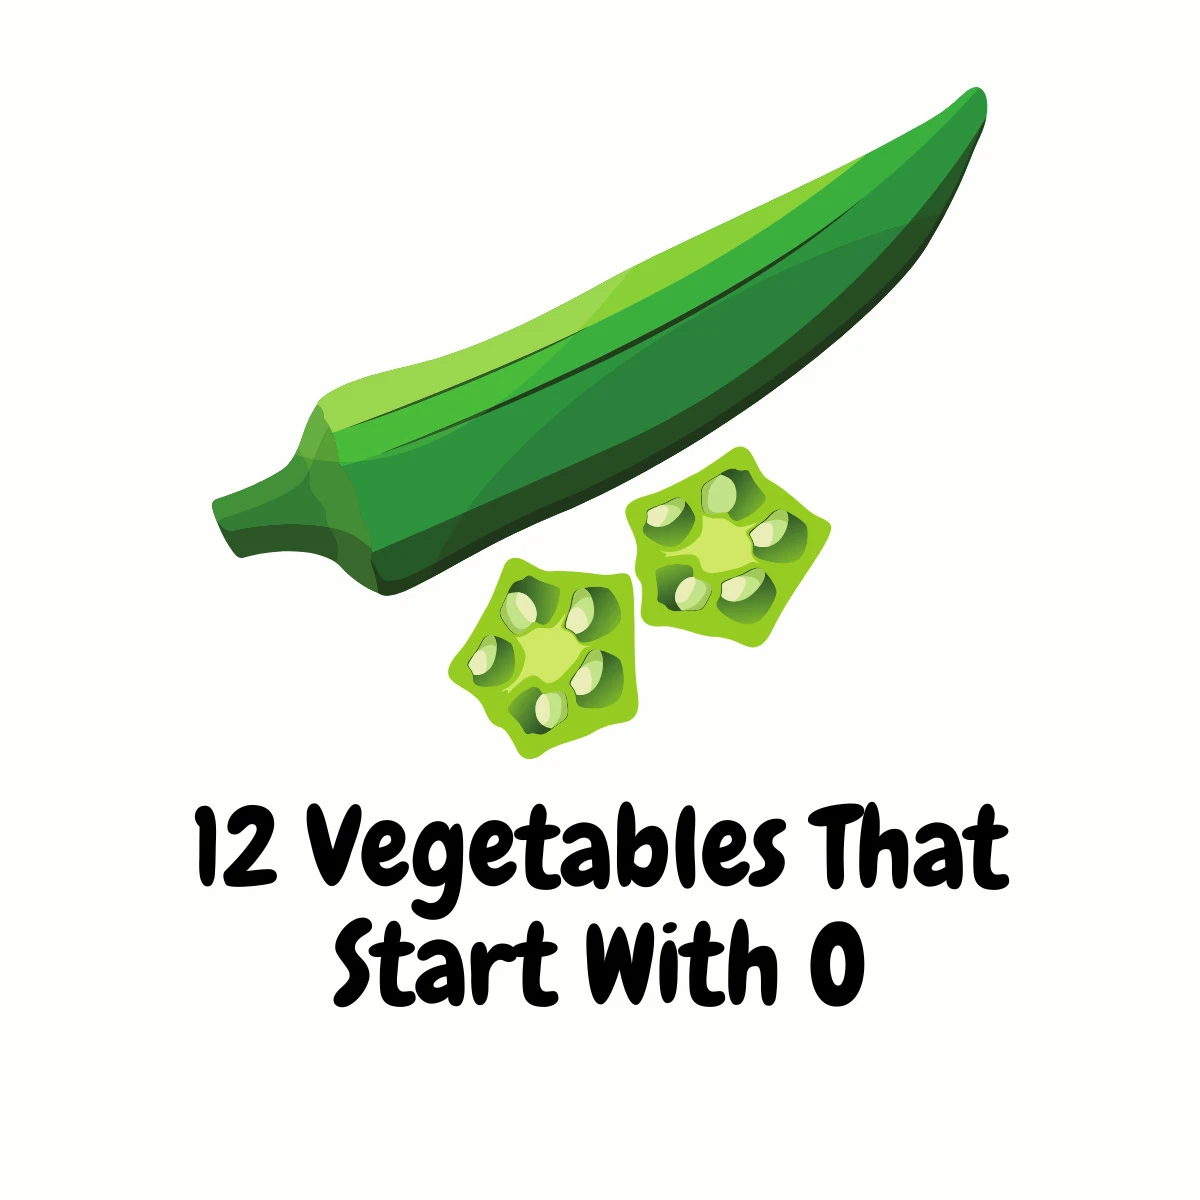 Vegetables That Start With O featured image | Girl Meets Food